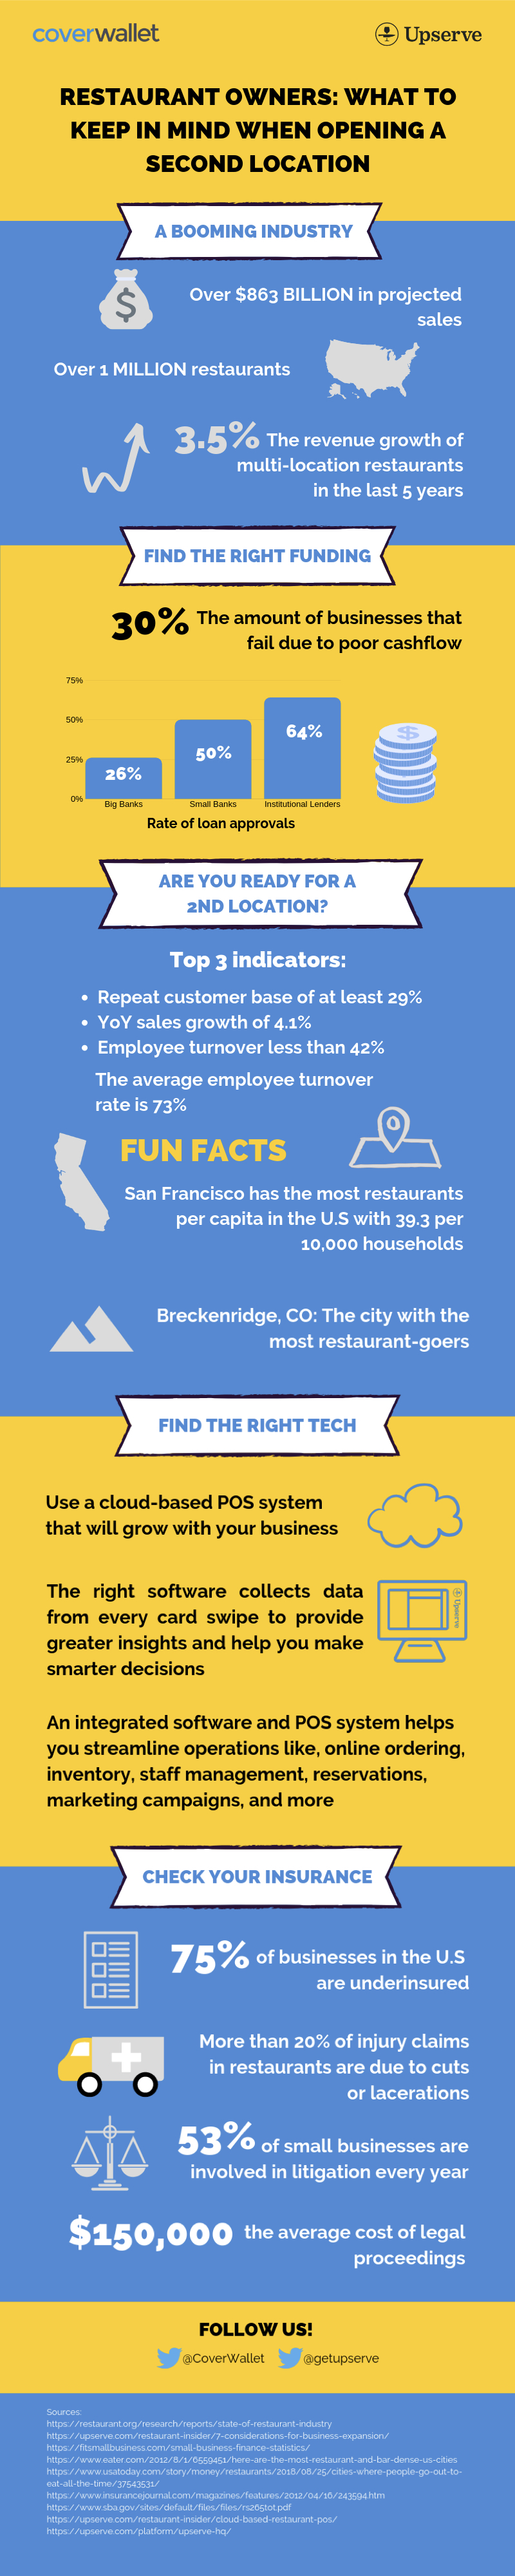 INFOGRAPHIC: What Restaurant Owners Need to Know Before Opening a Second Location